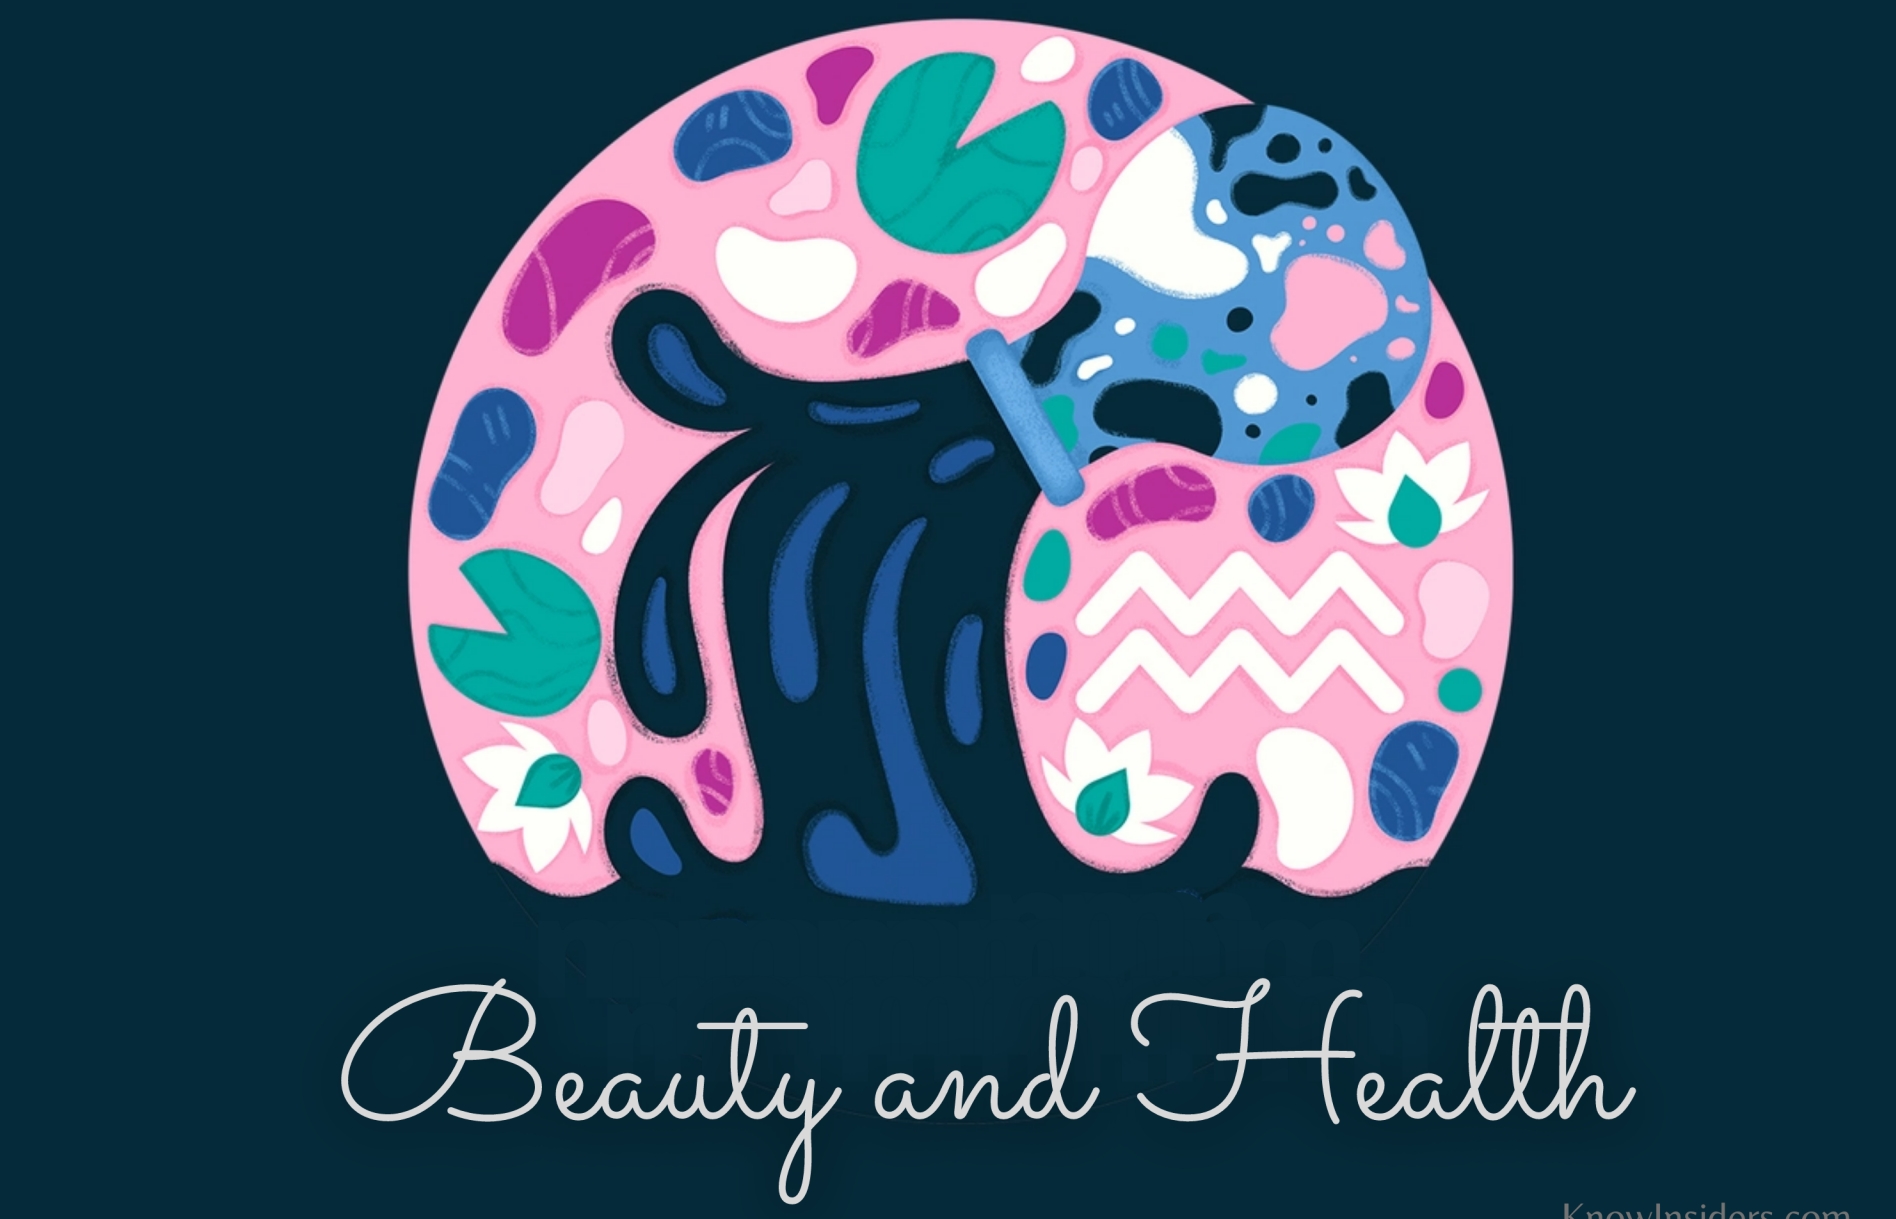 AQUARIUS Horoscope: Astrological Predictions for Beauty and Health